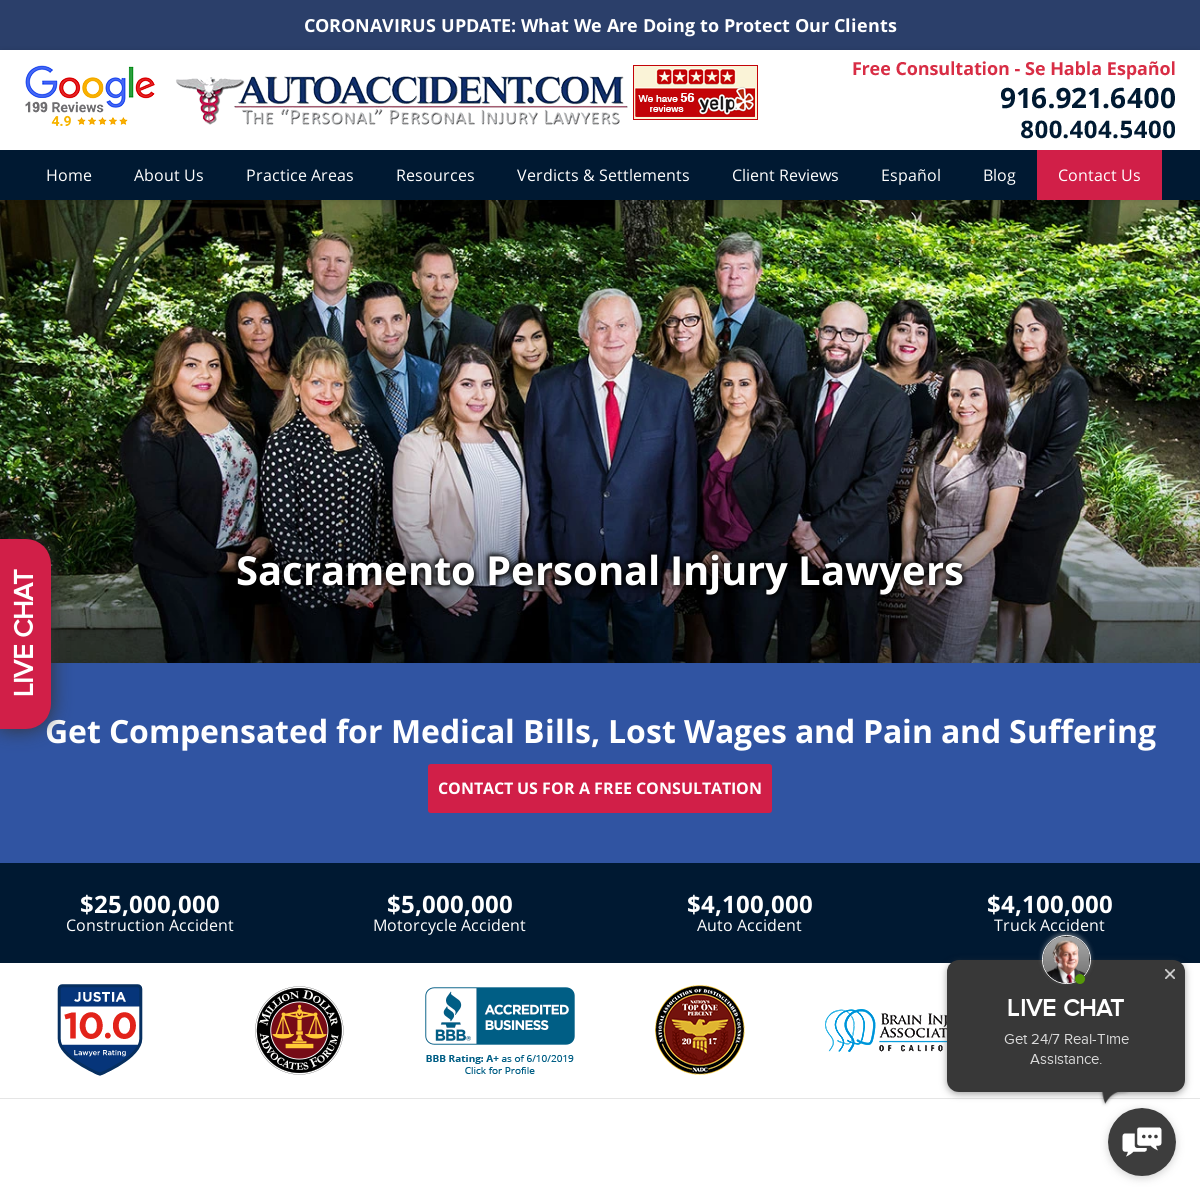 A complete backup of autoaccident.com